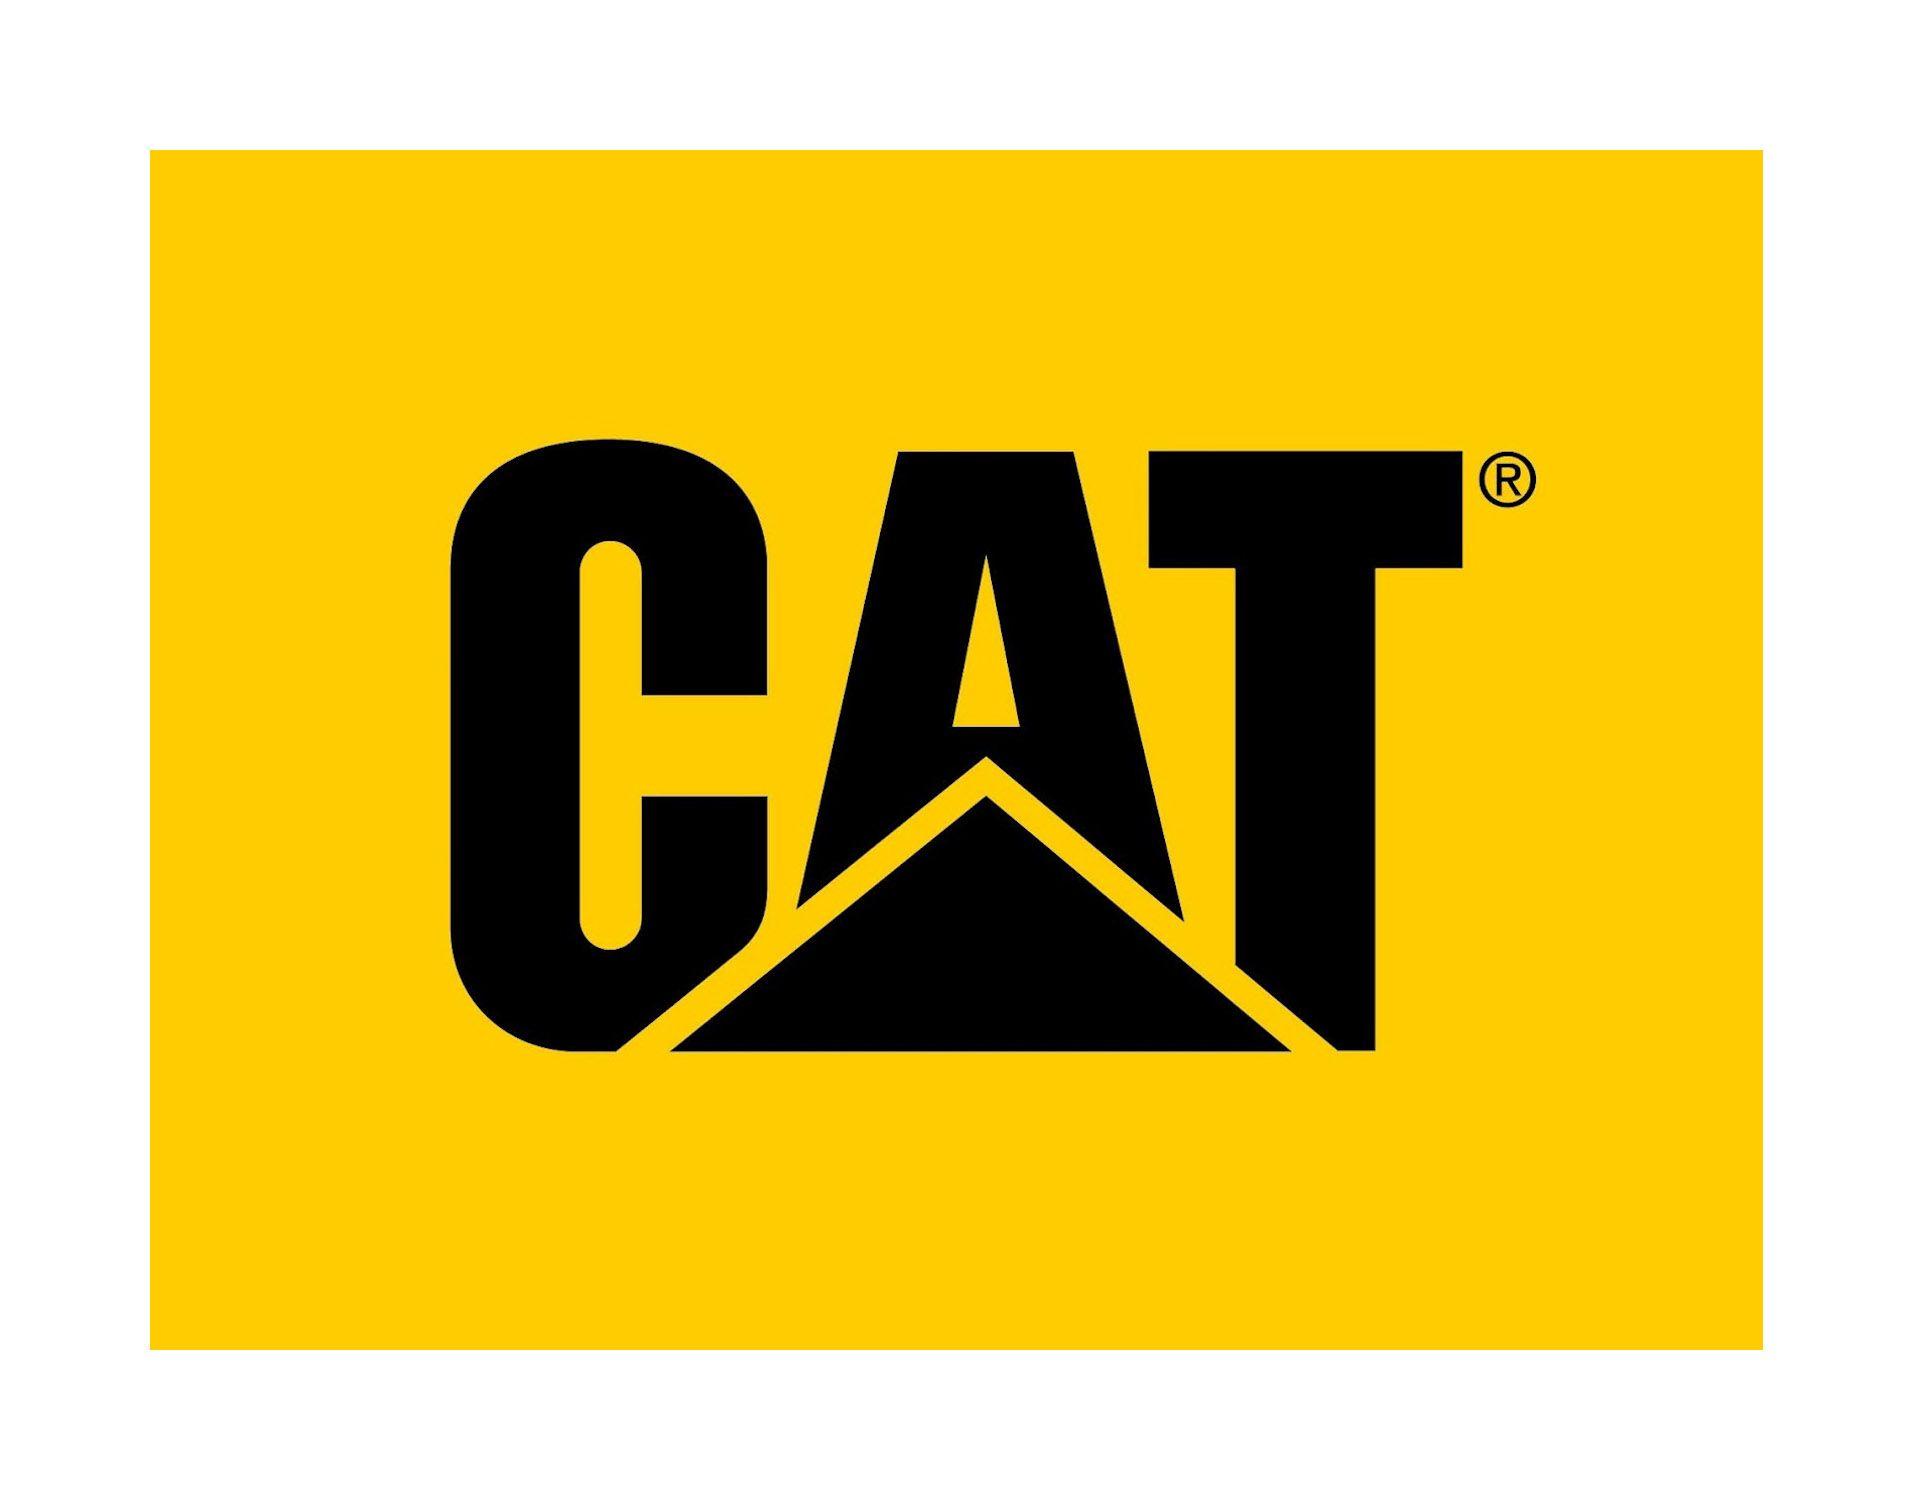 Over a Yellow Triangle Logo - Caterpillar Logo, Caterprillar Symbol Meaning, History and Evolution